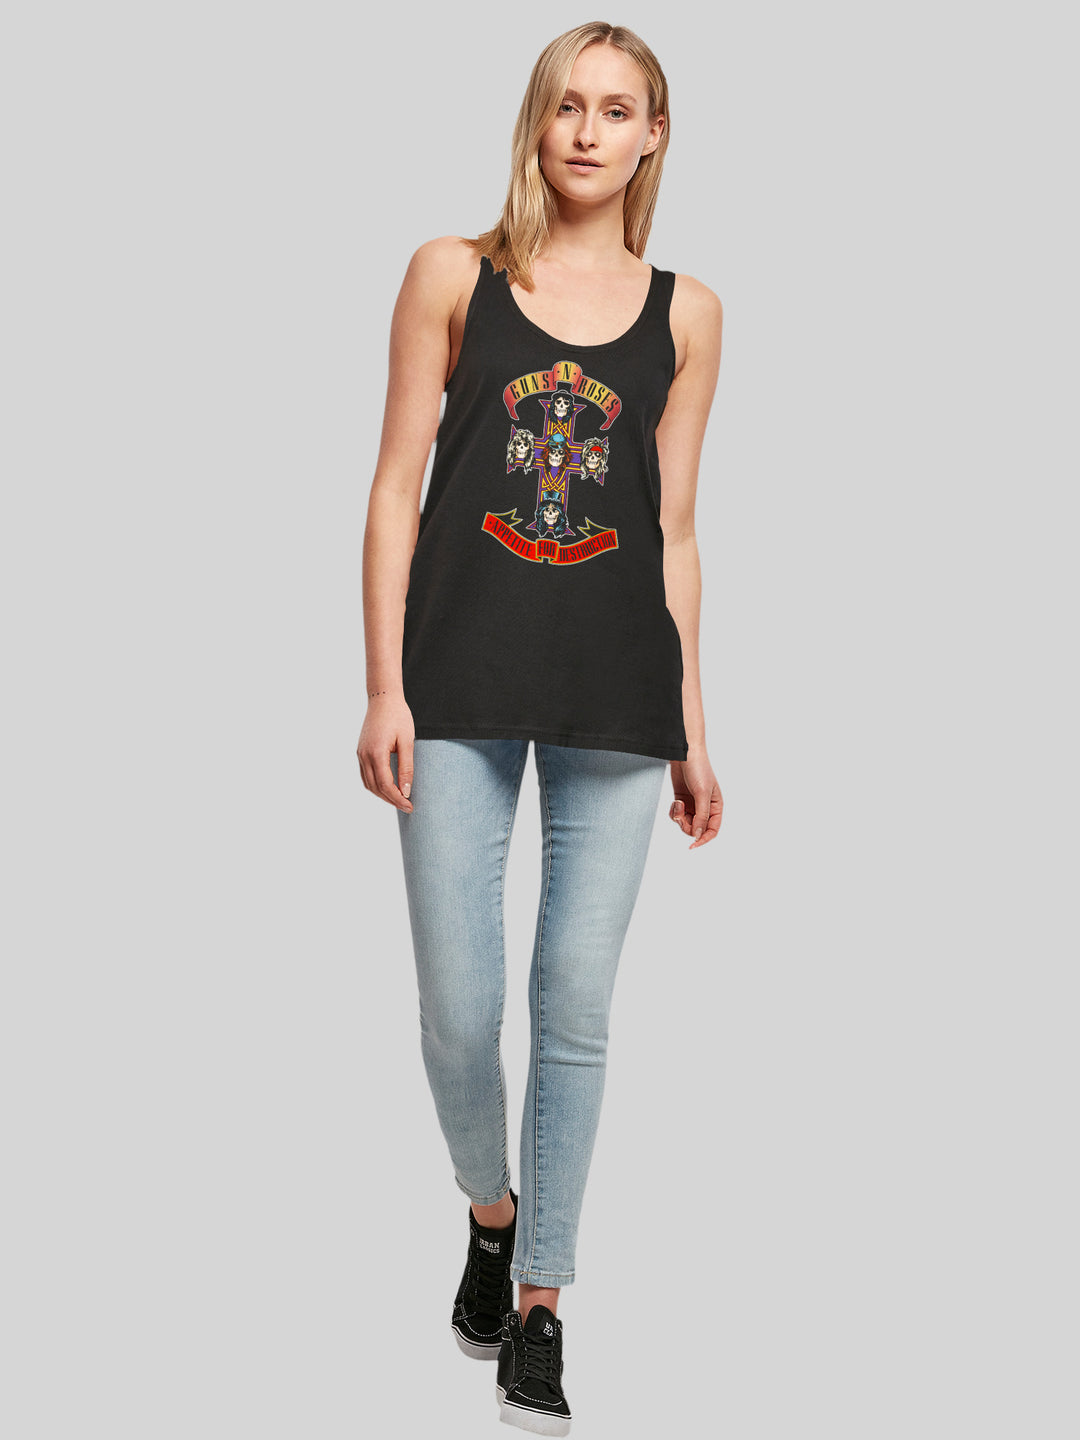 Guns 'n' Roses Appetite For Destruction with Ladies Tanktop